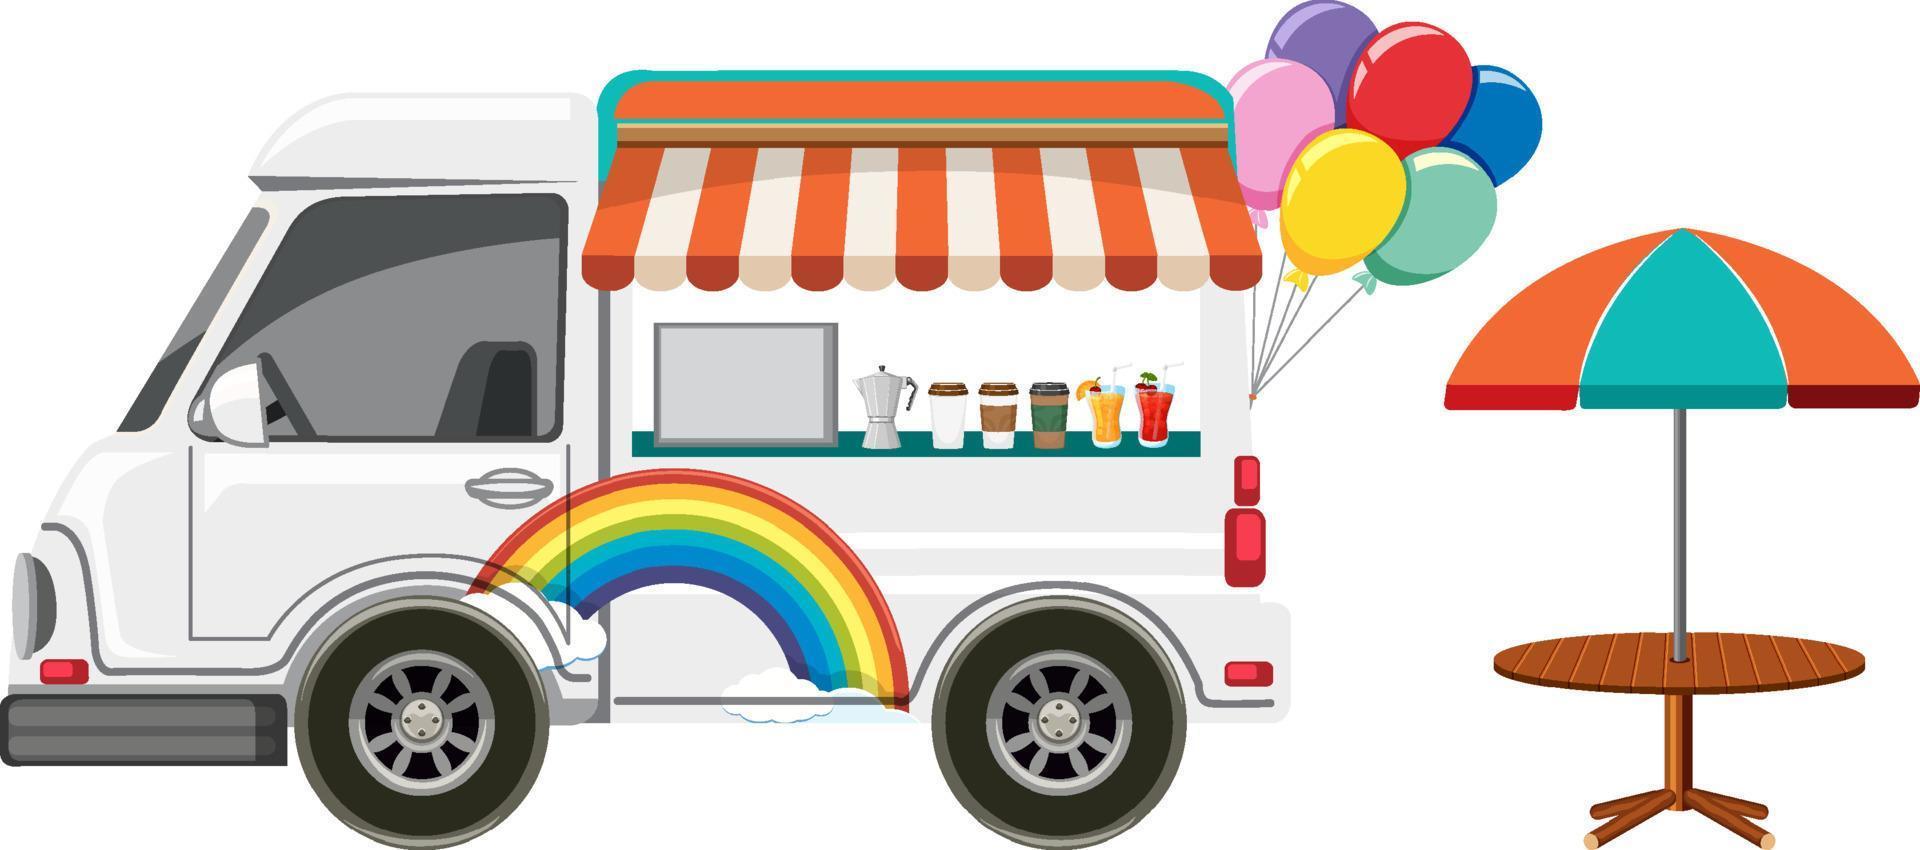 A cute food truck on white background vector